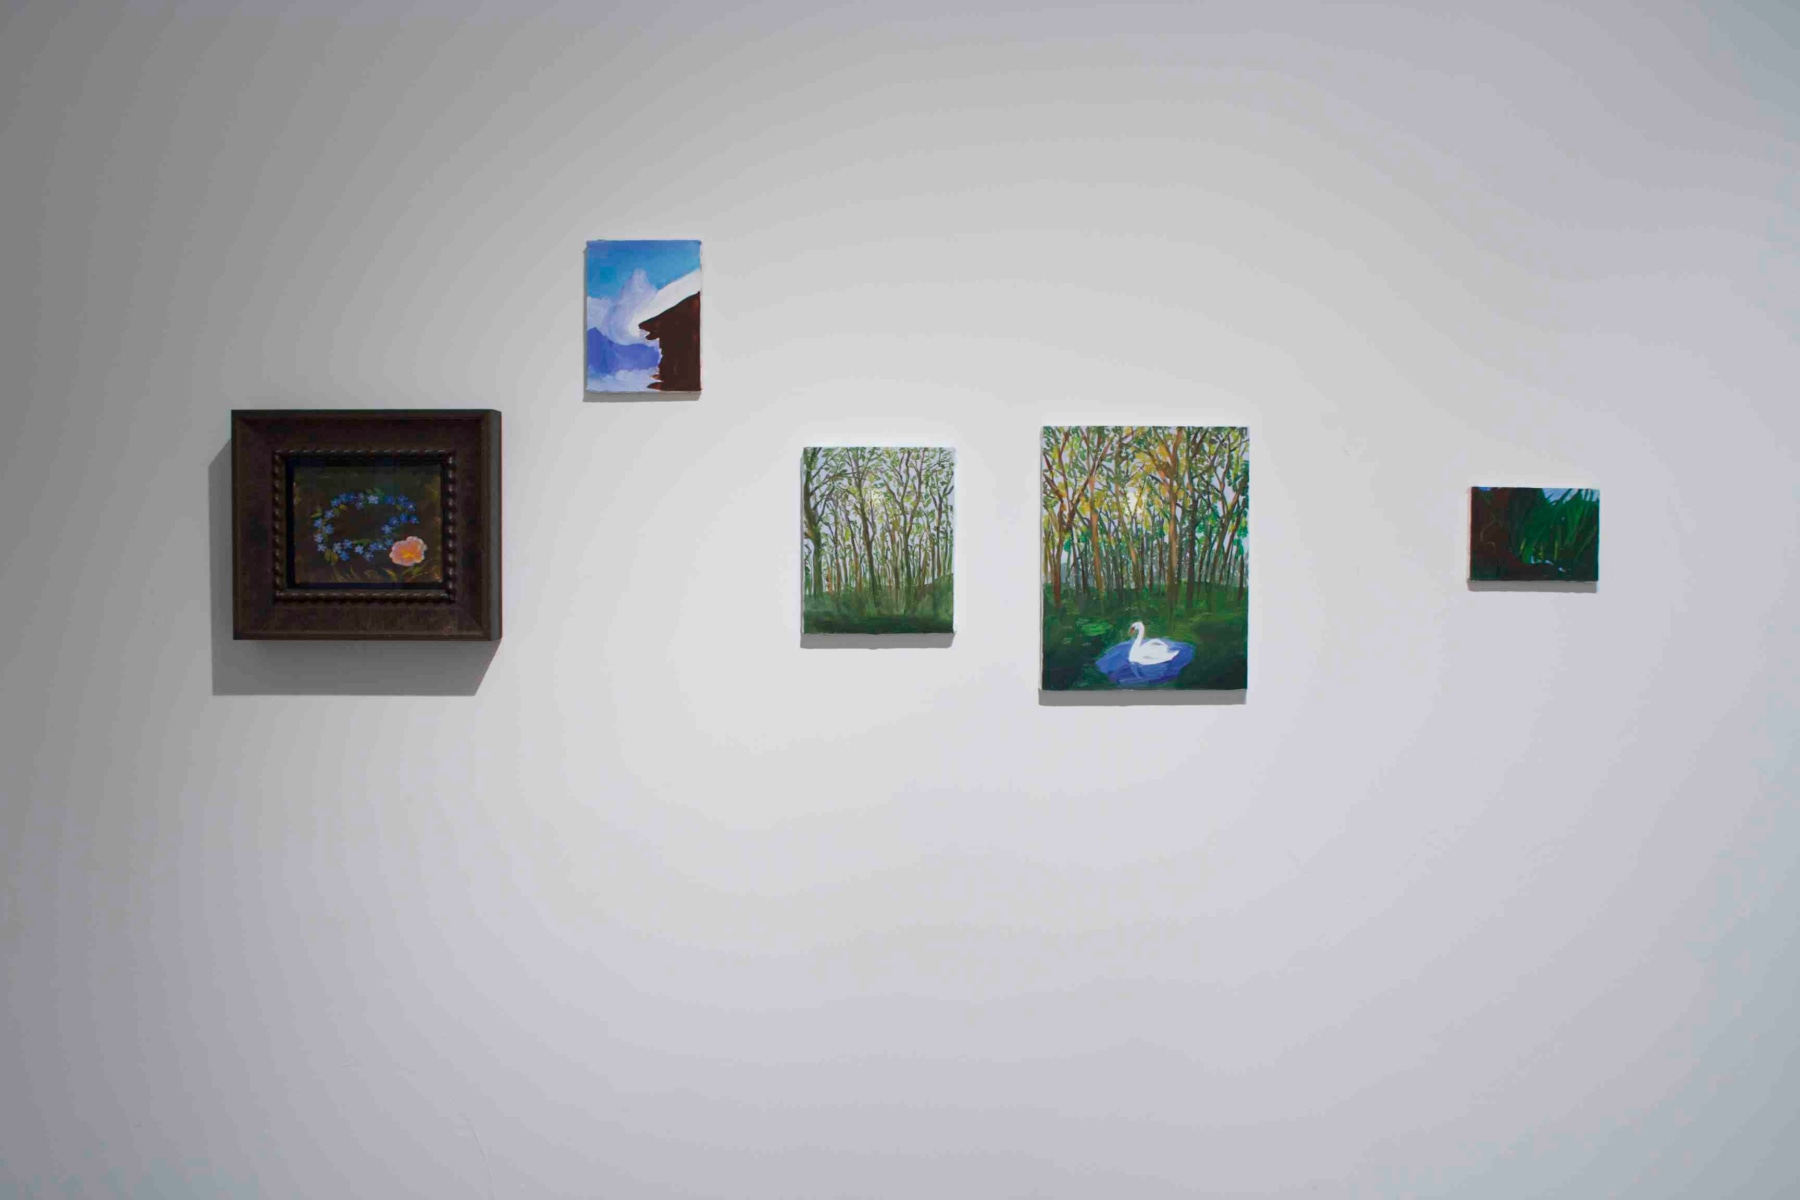 Installation view of paintings